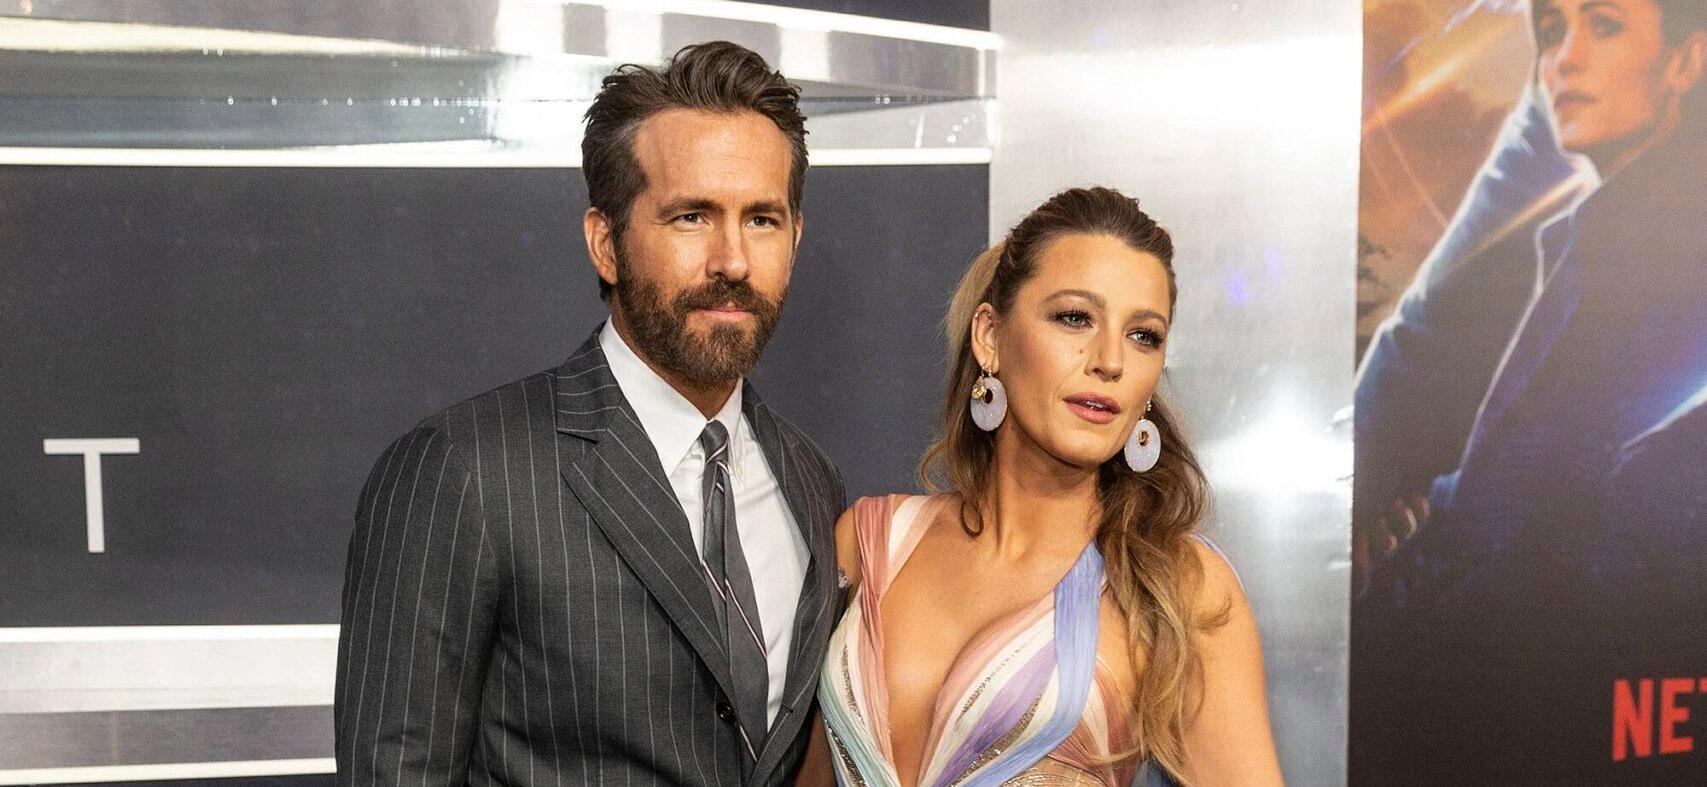 Blake Lively and Ryan Reynolds at the NY: The Adam Project premiere